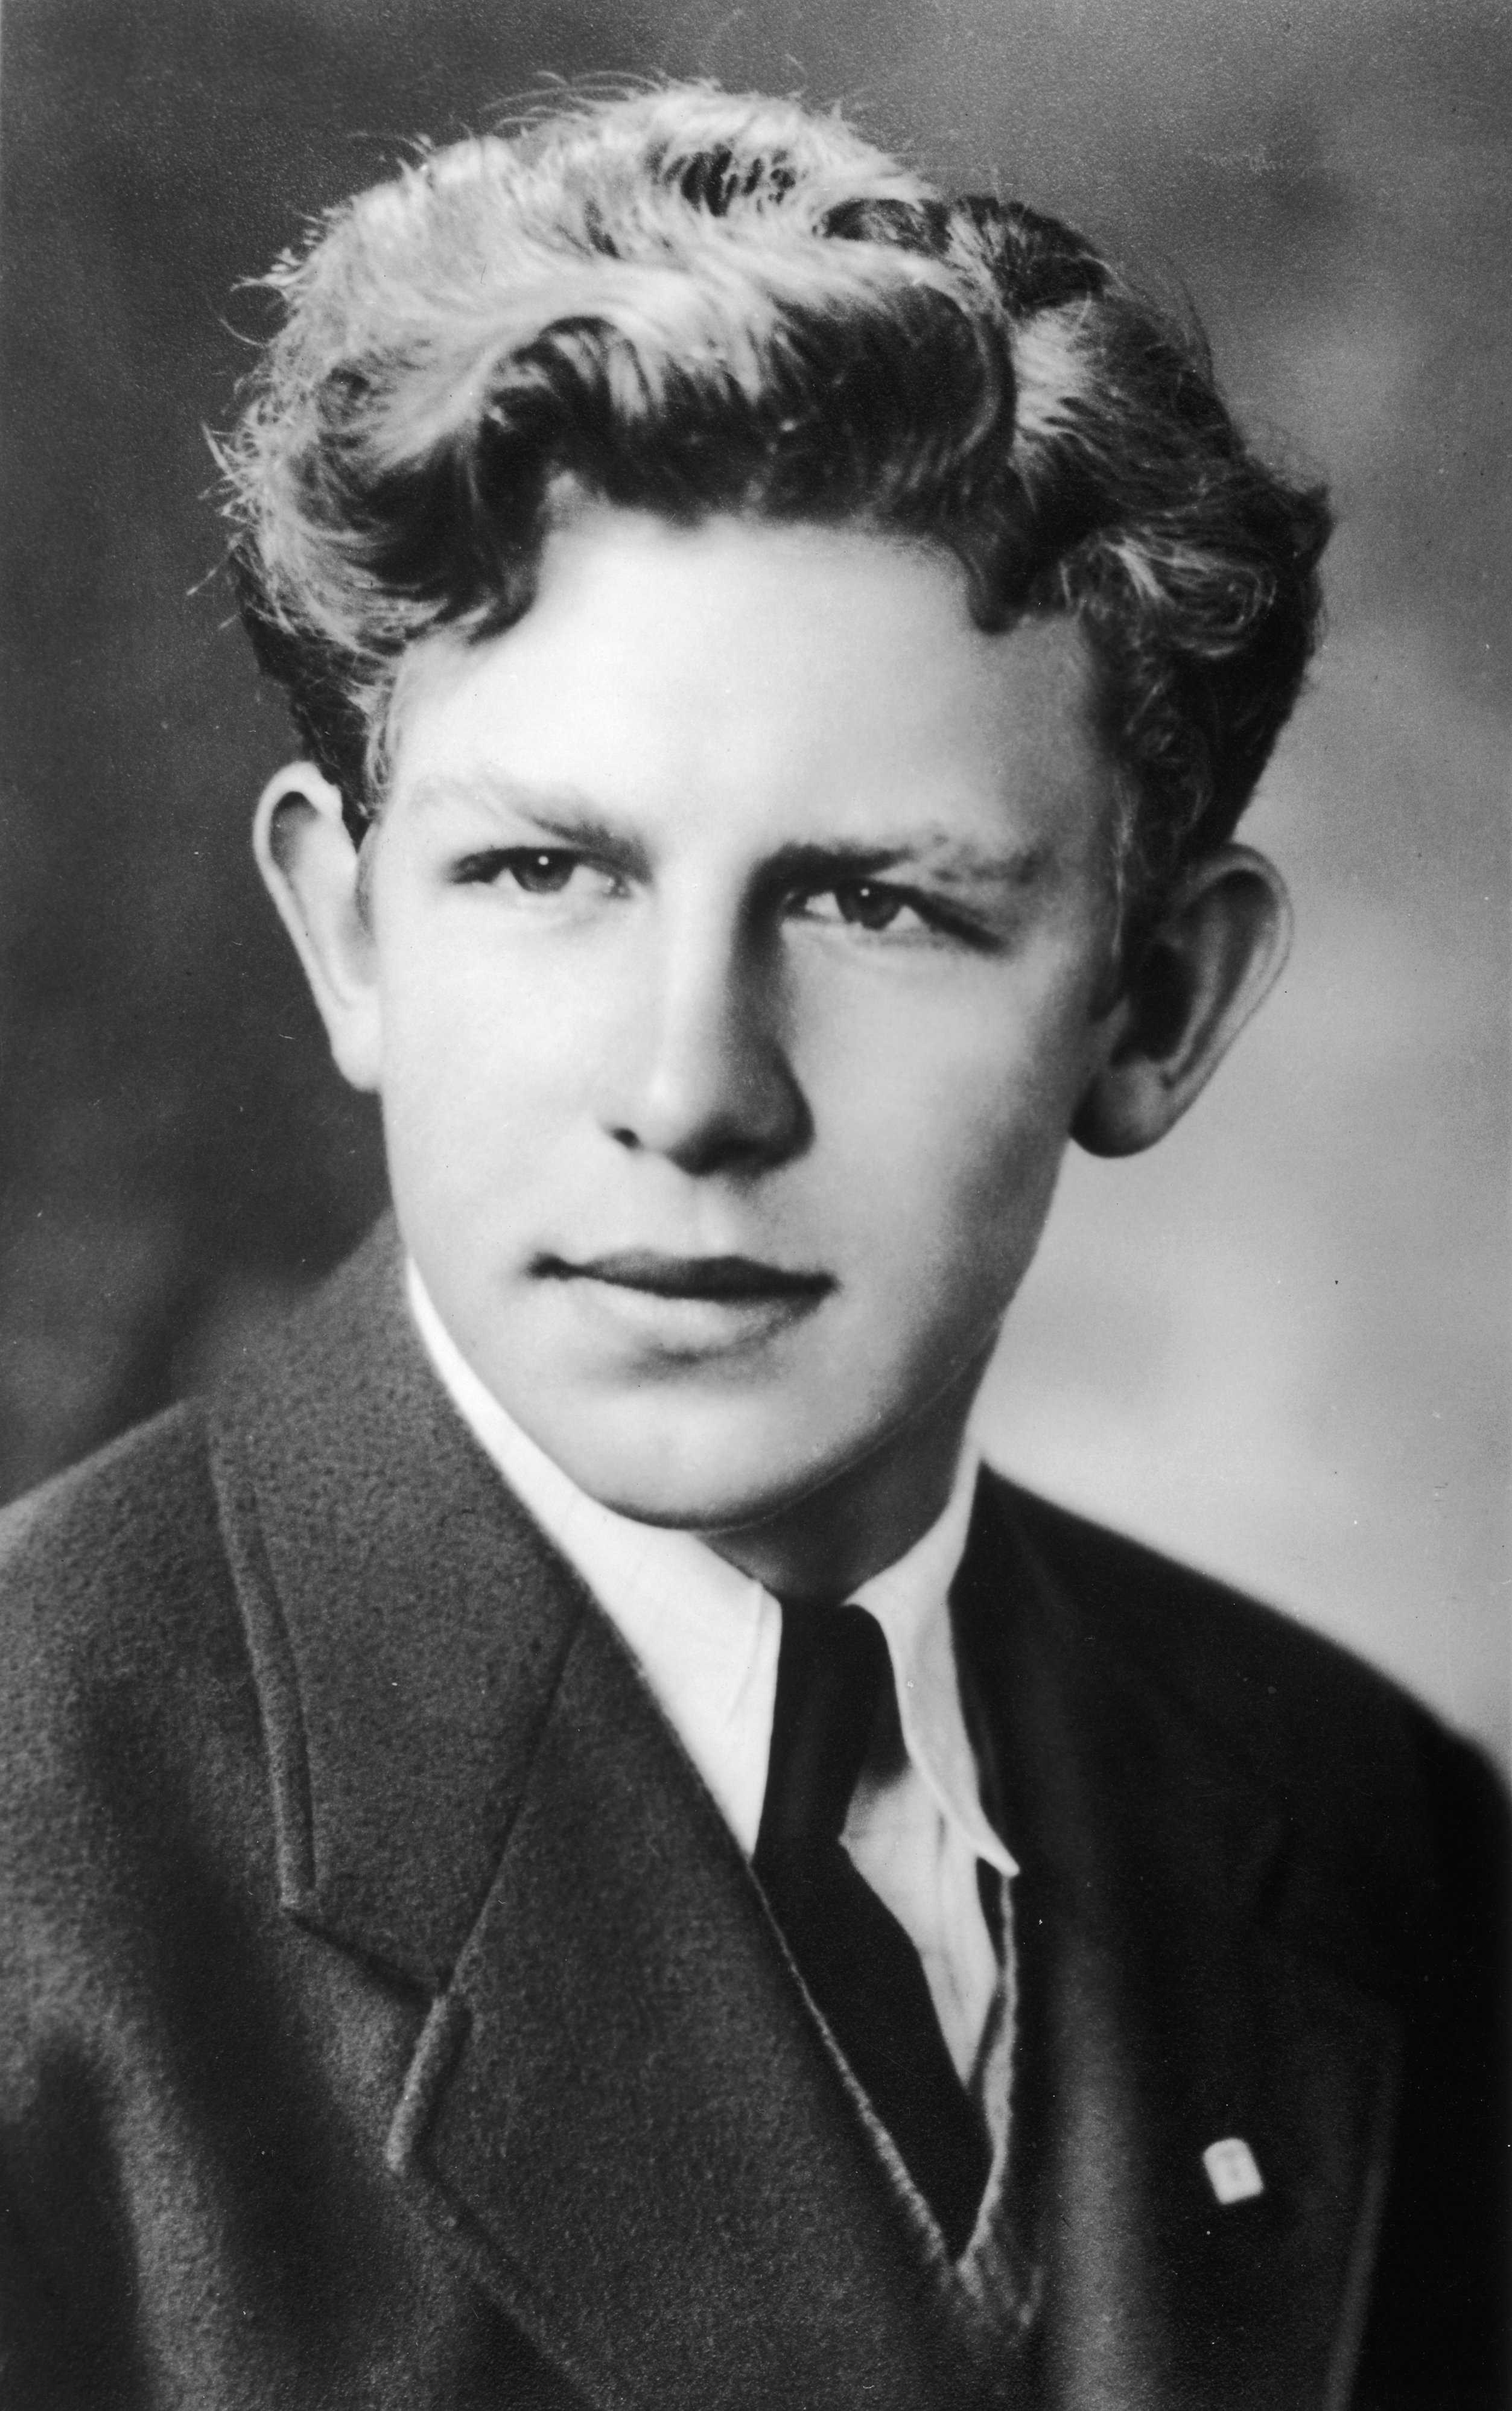 Photo of Andy Griffith circa 1940 | Source: Getty Images